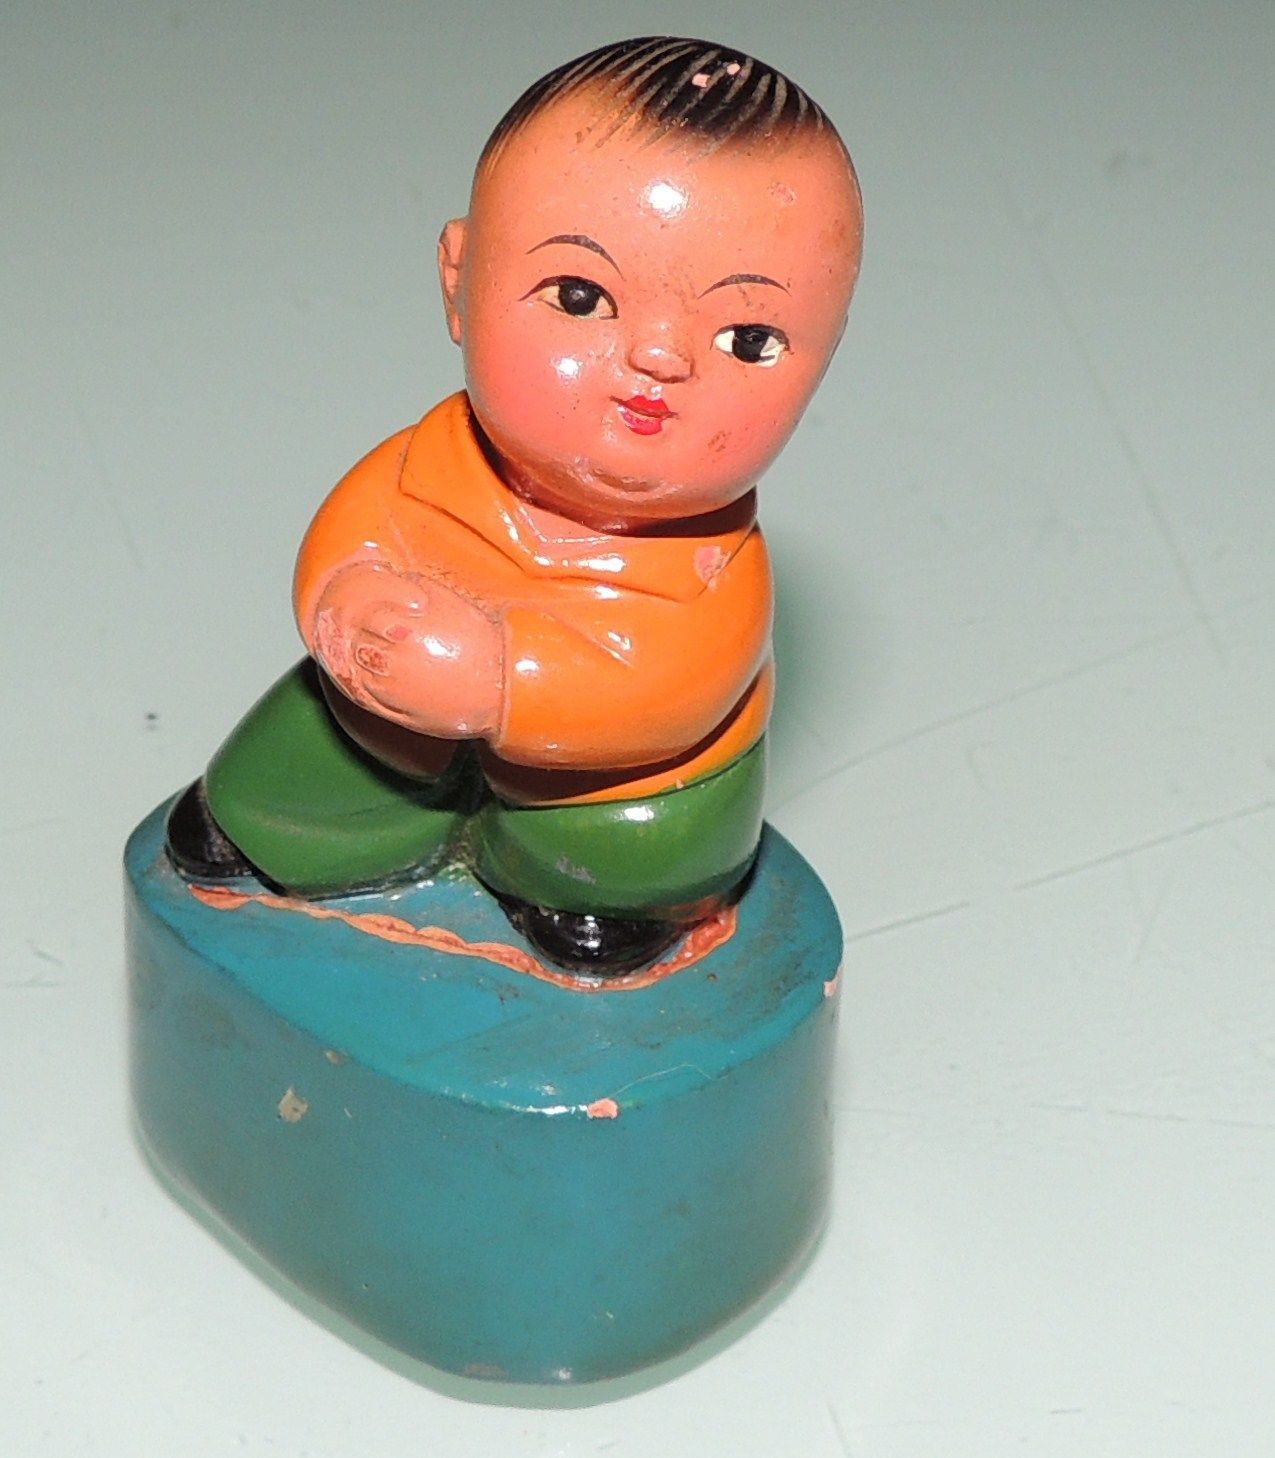 Vintage Chinese Pencil Sharpener Chinese child doll made in china